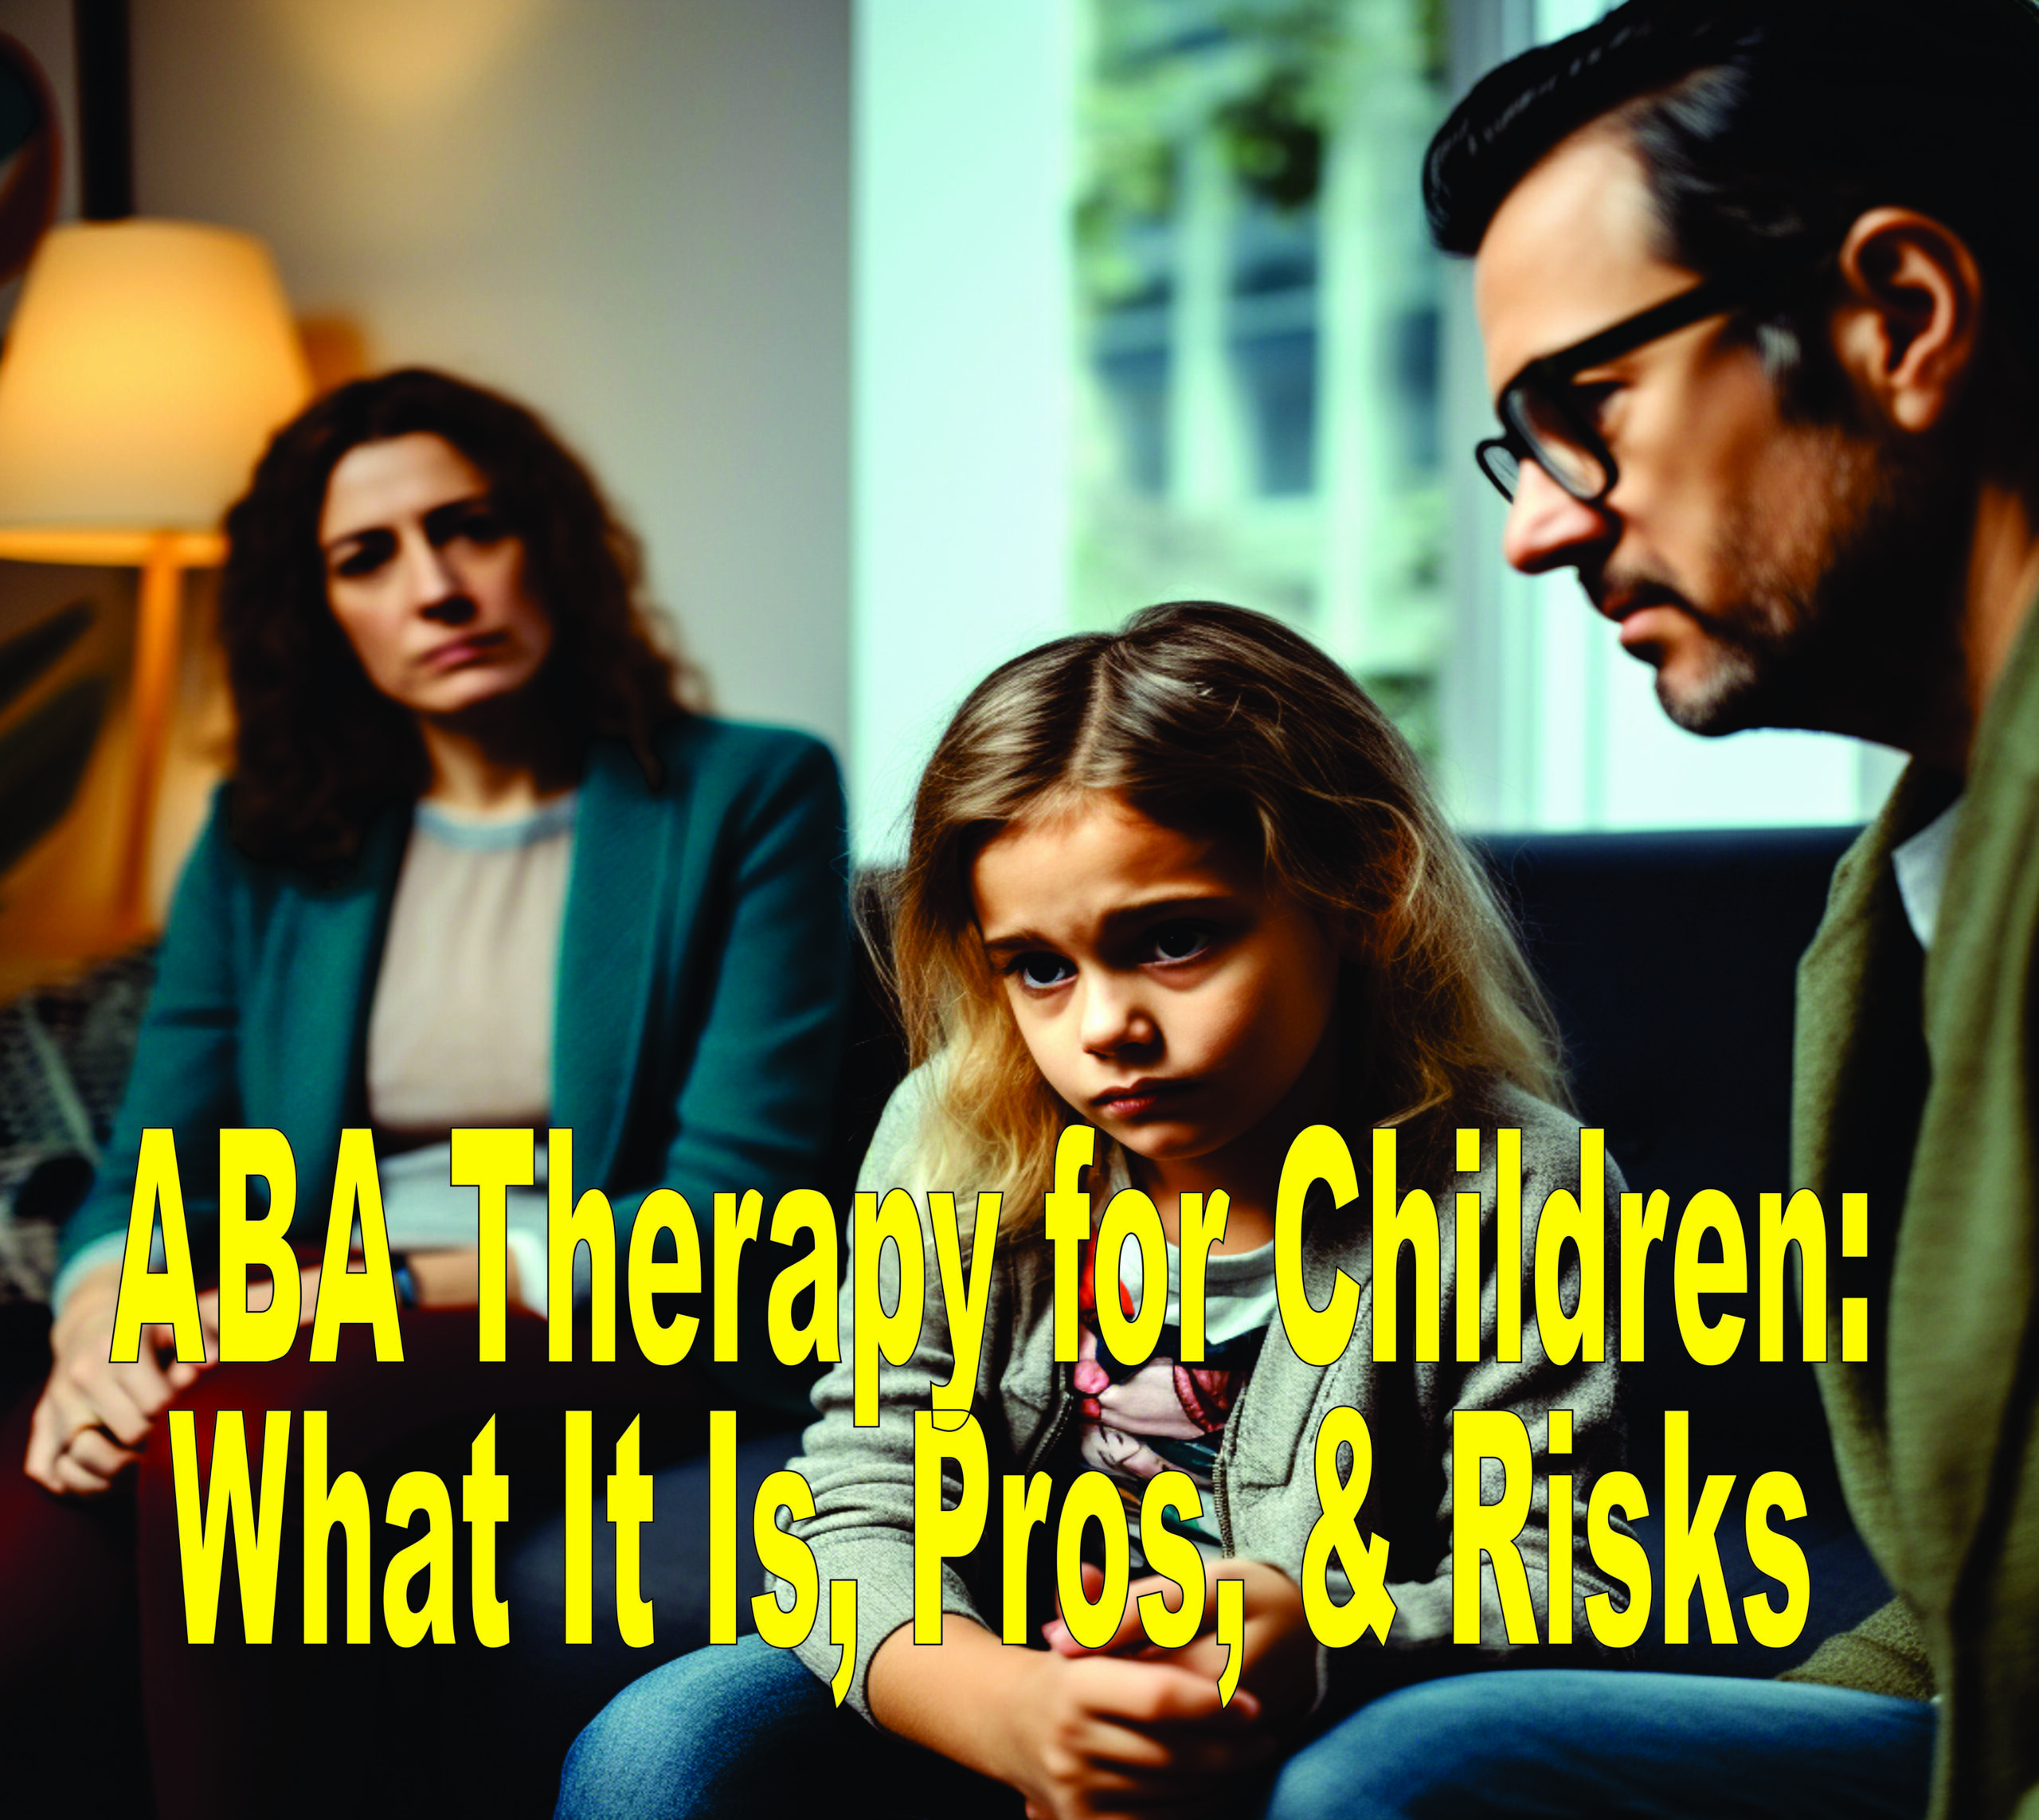 Aba Therapy For Children What It Is, Pros, & Risks